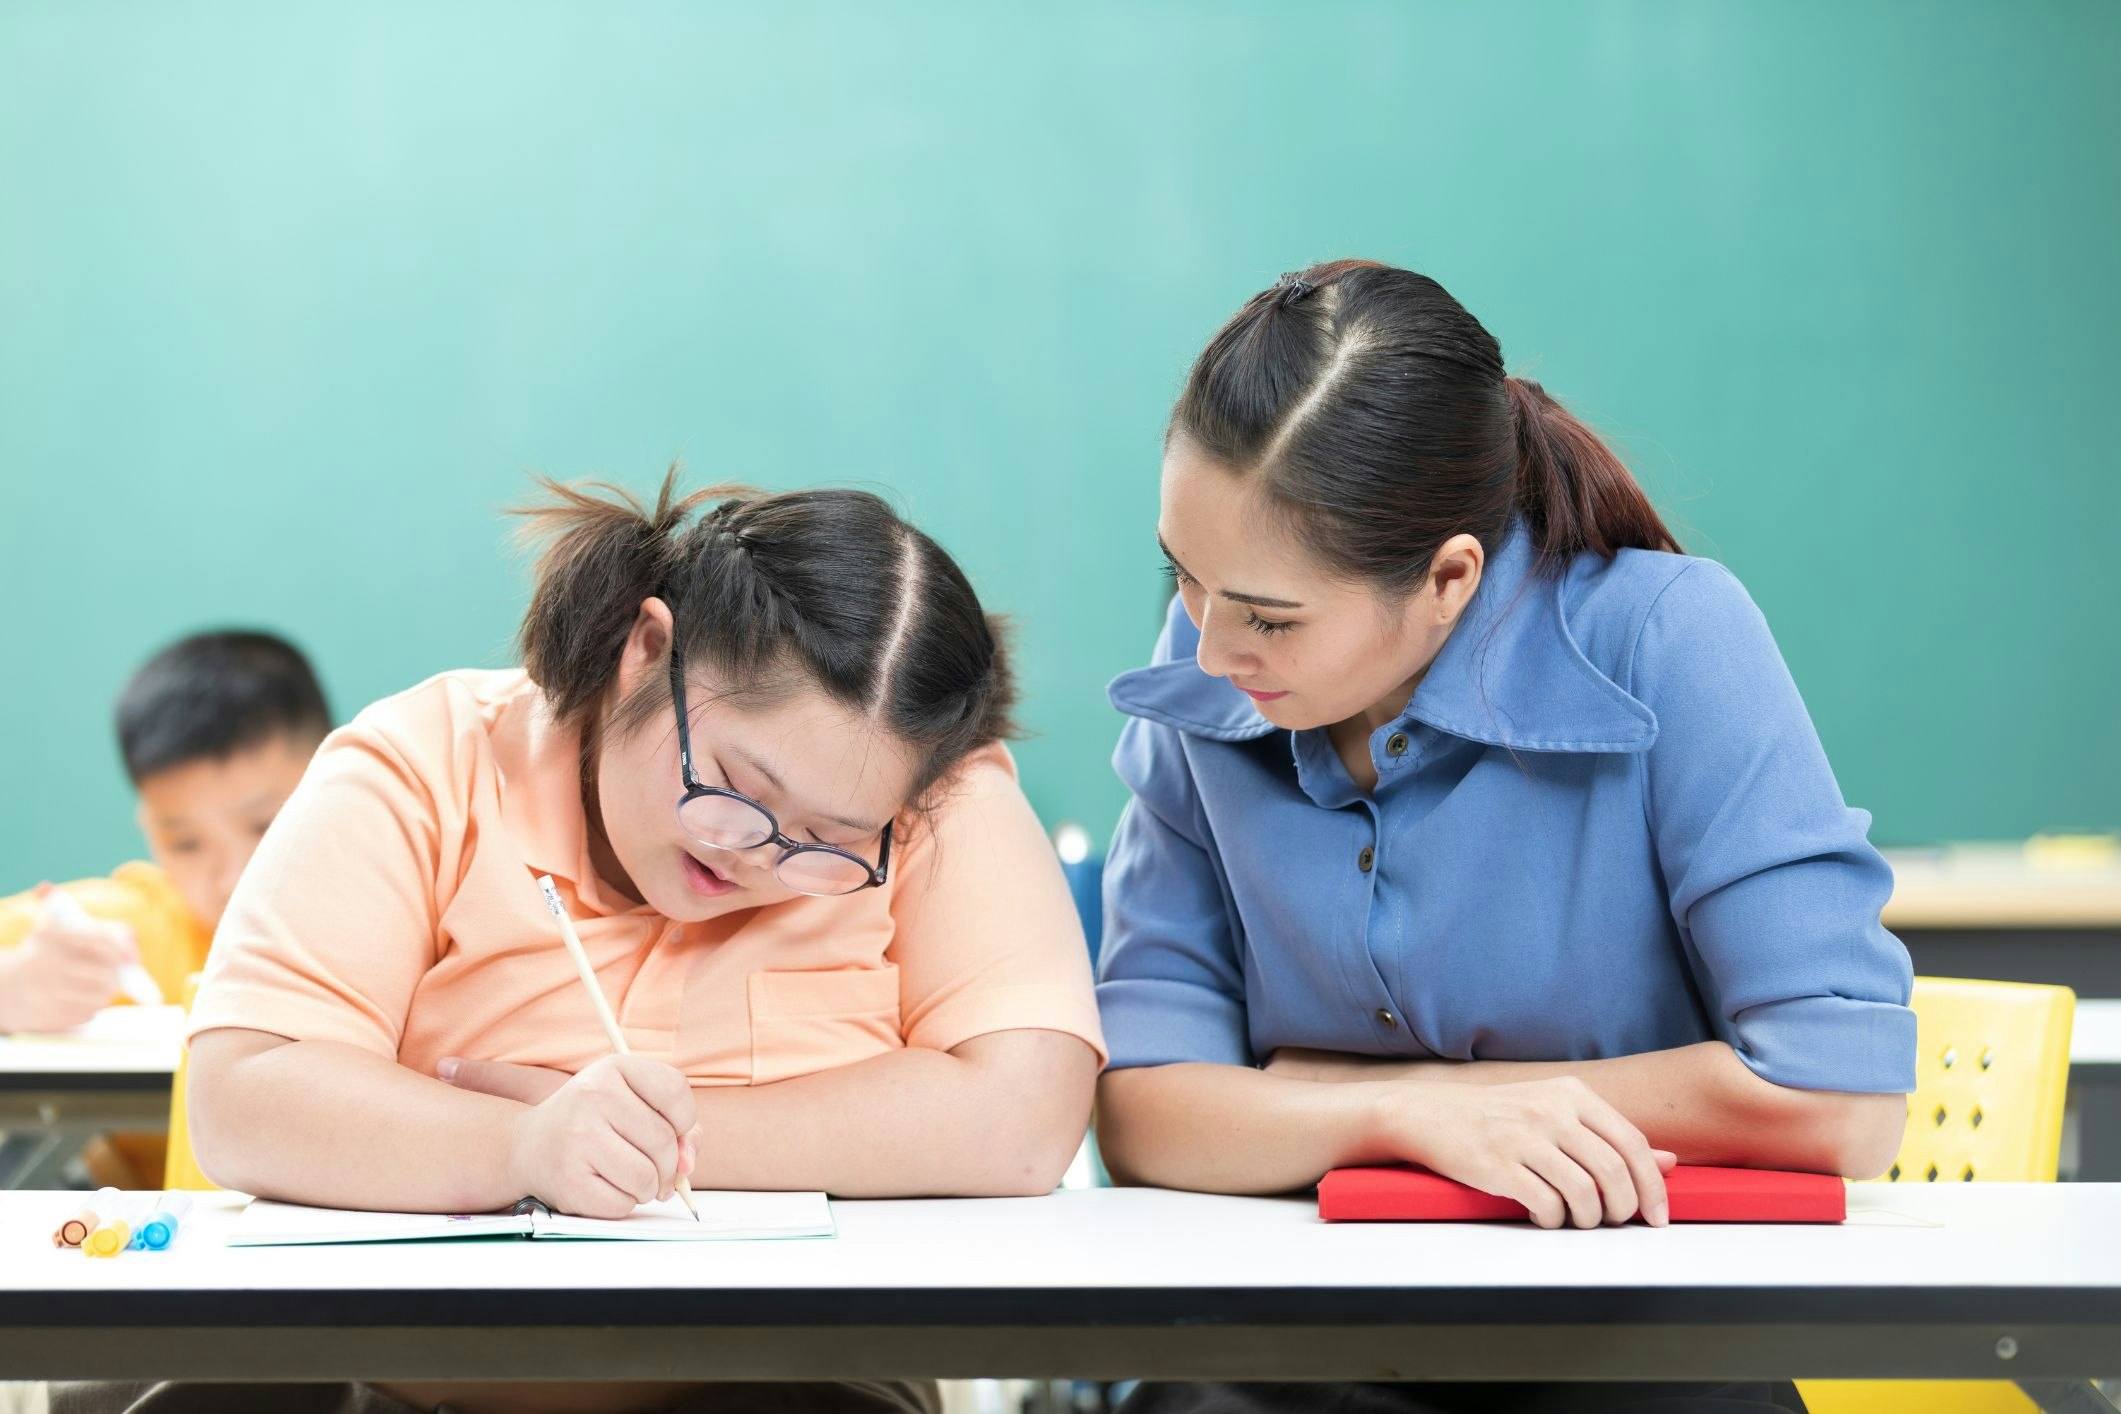 <p>New research suggests that increasing teacher training to specialise in adapting education for students living with disability could improve their chances of success. [Source: Shutterstock]</p>
